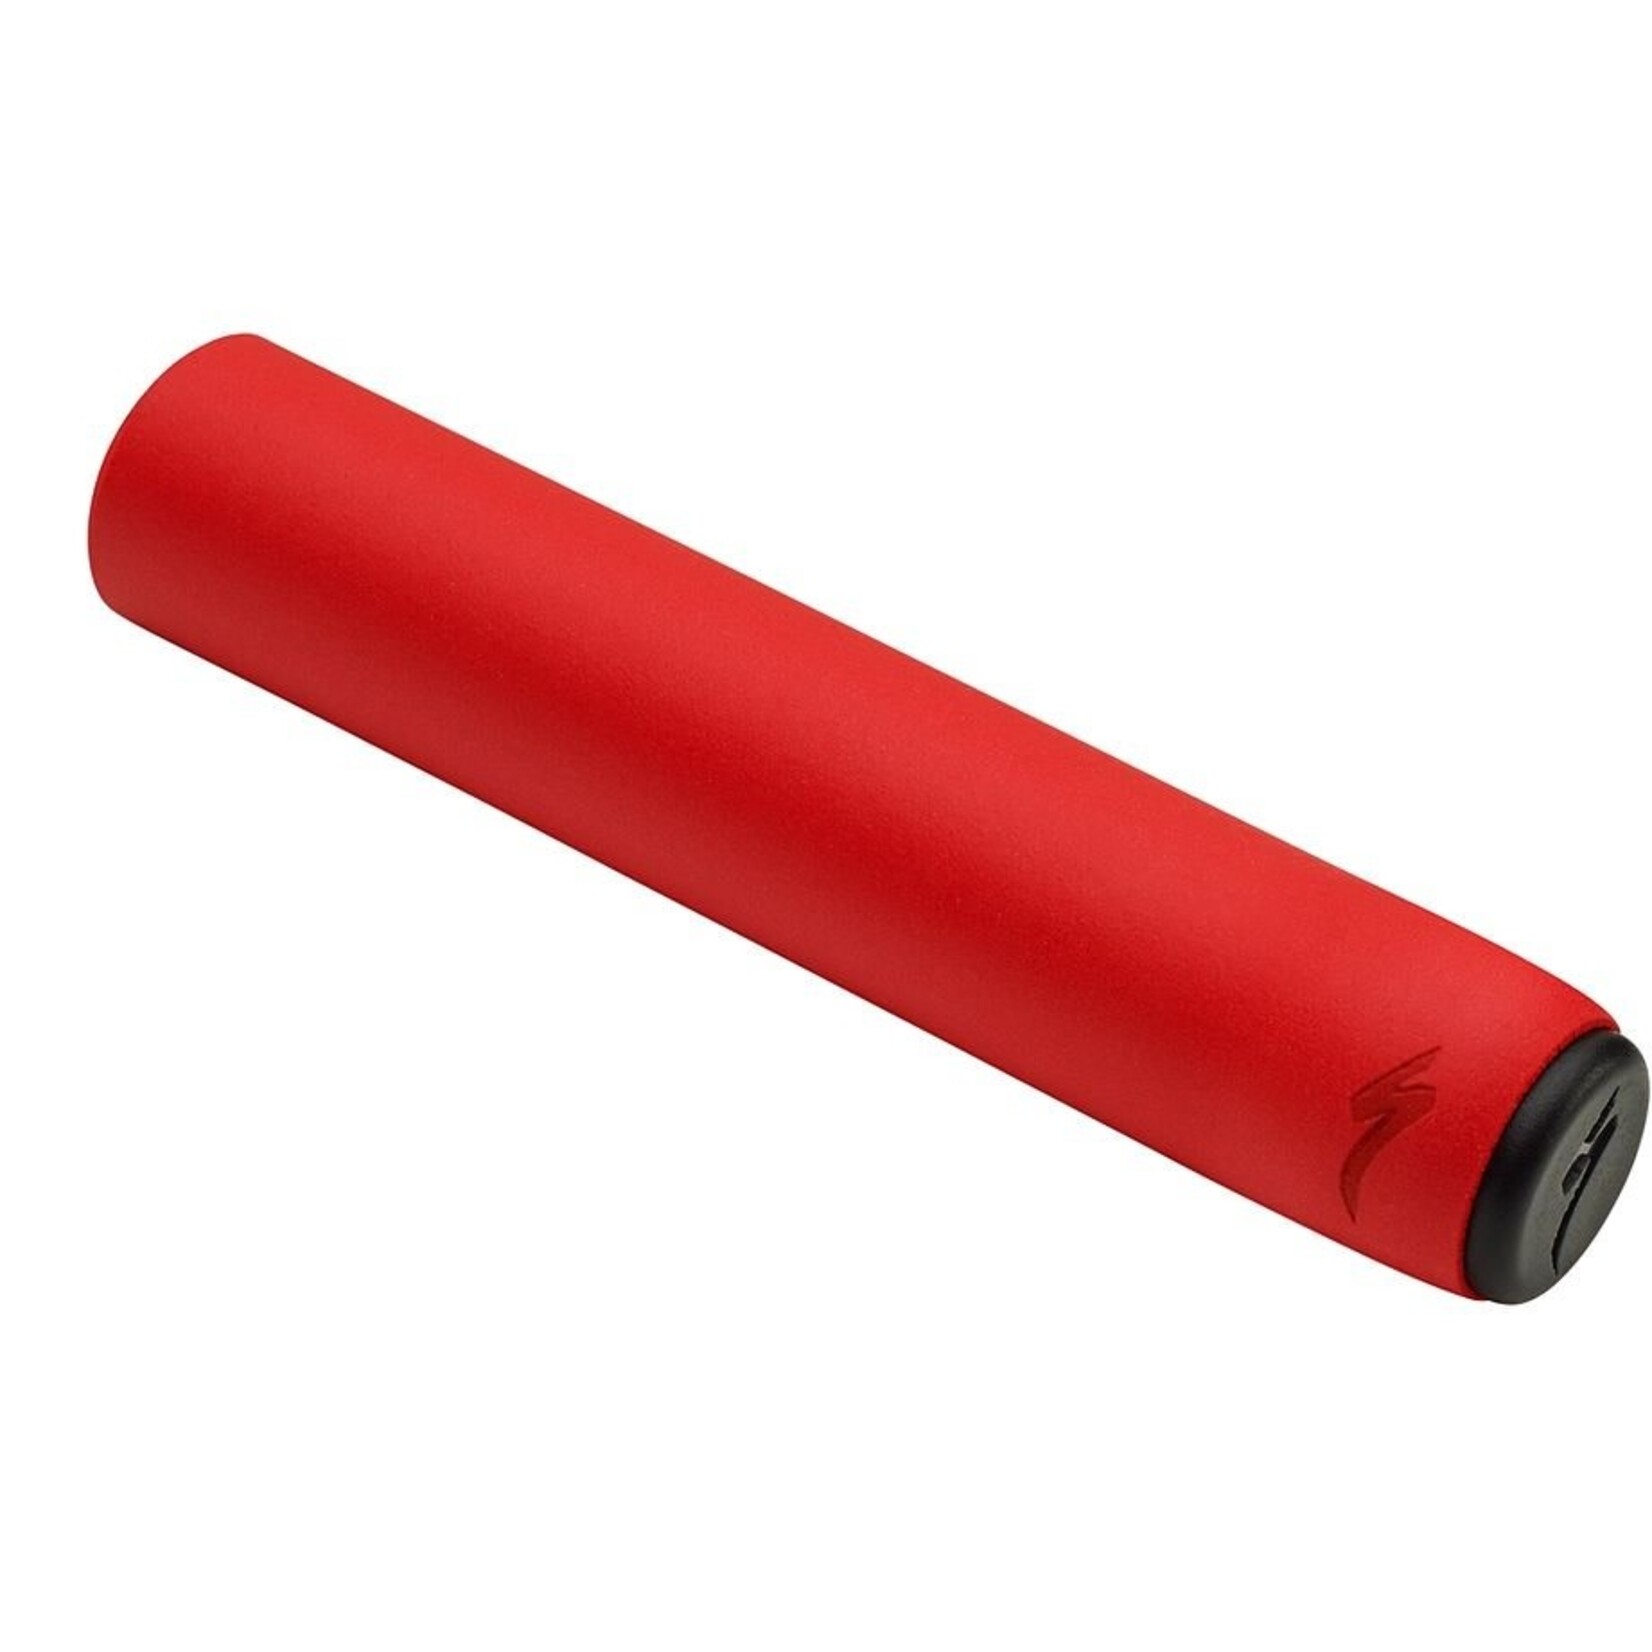 Specialized XC Race Grips in Red